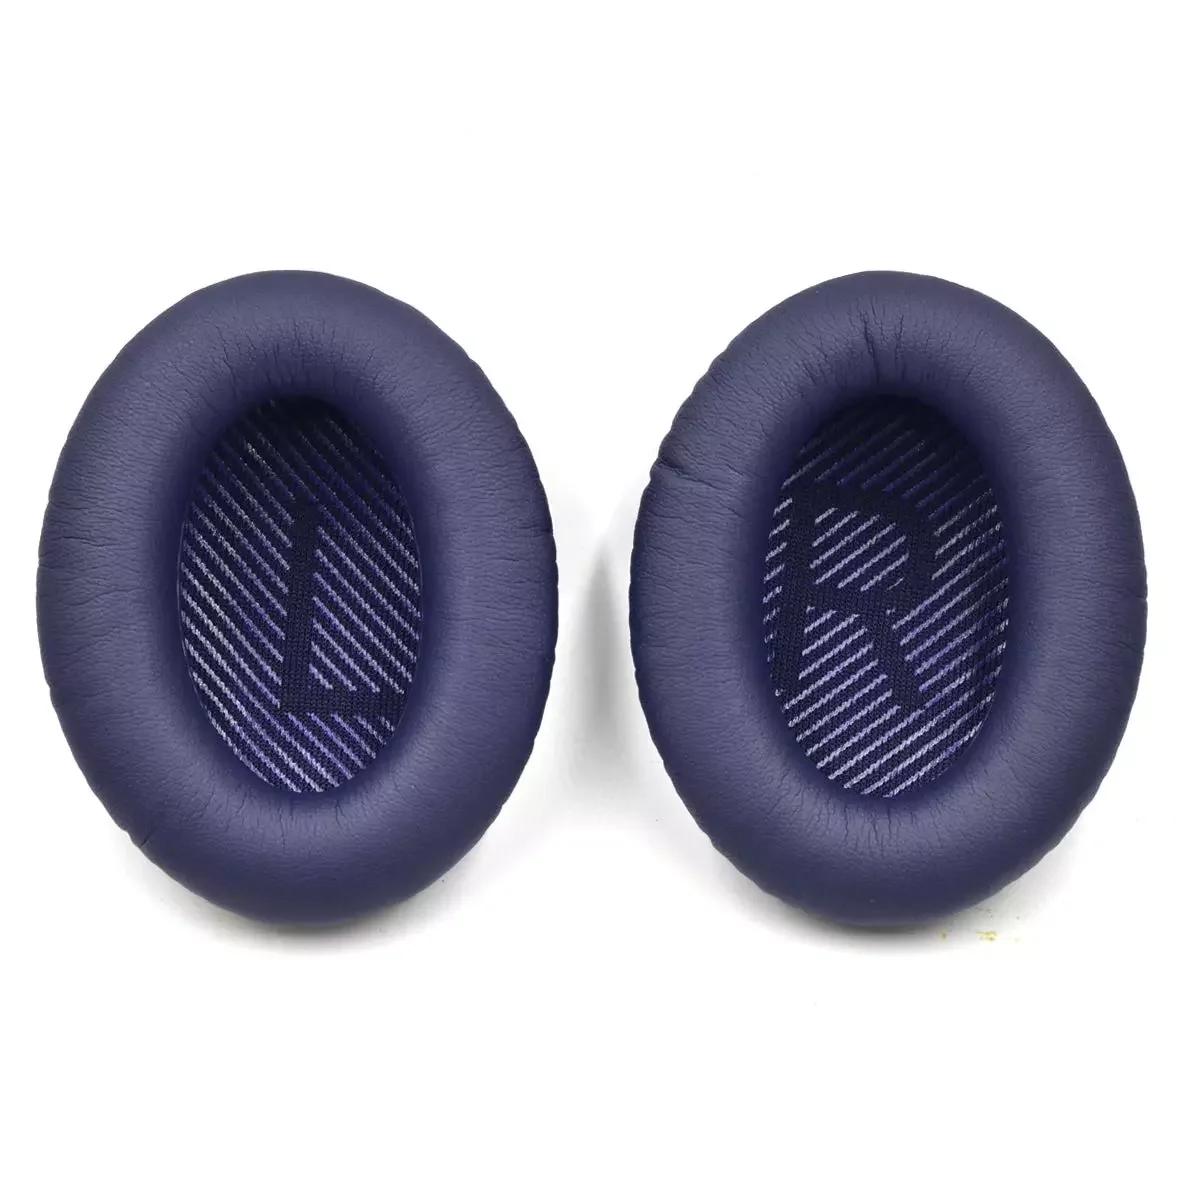 

Replacement Ear Cushions Soft Protein Leather and Memory Foam Blue Ear Pads for Bose Quiet Comfort 35 QC35 II Headphones